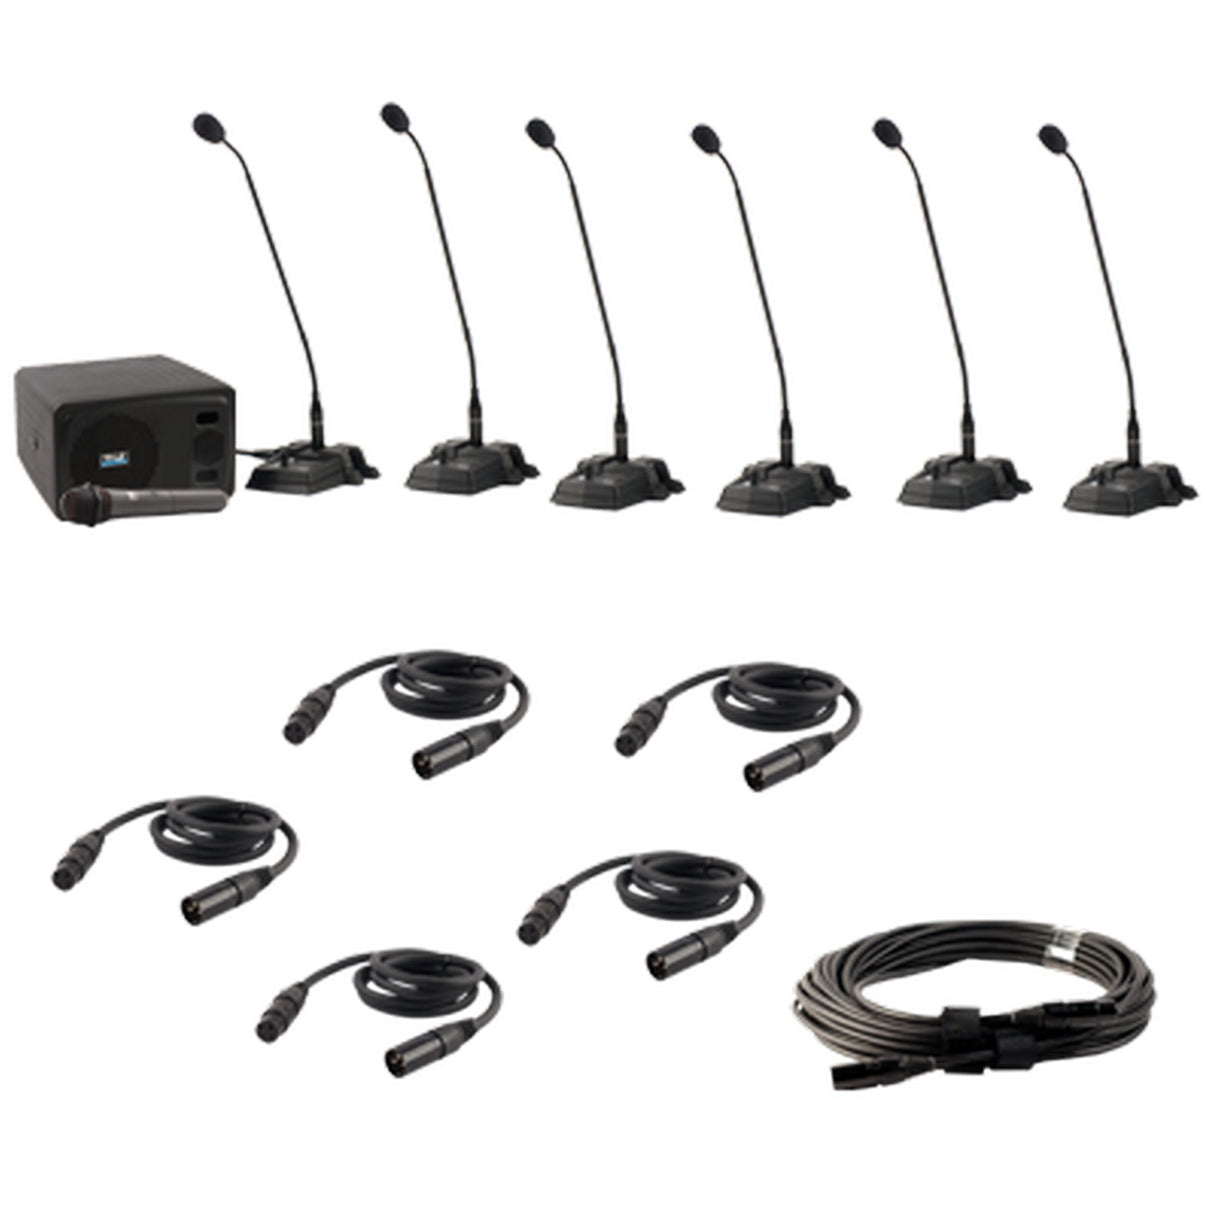 Anchor Audio CouncilMAN CM-6W 6-User Wireless Conference System Package